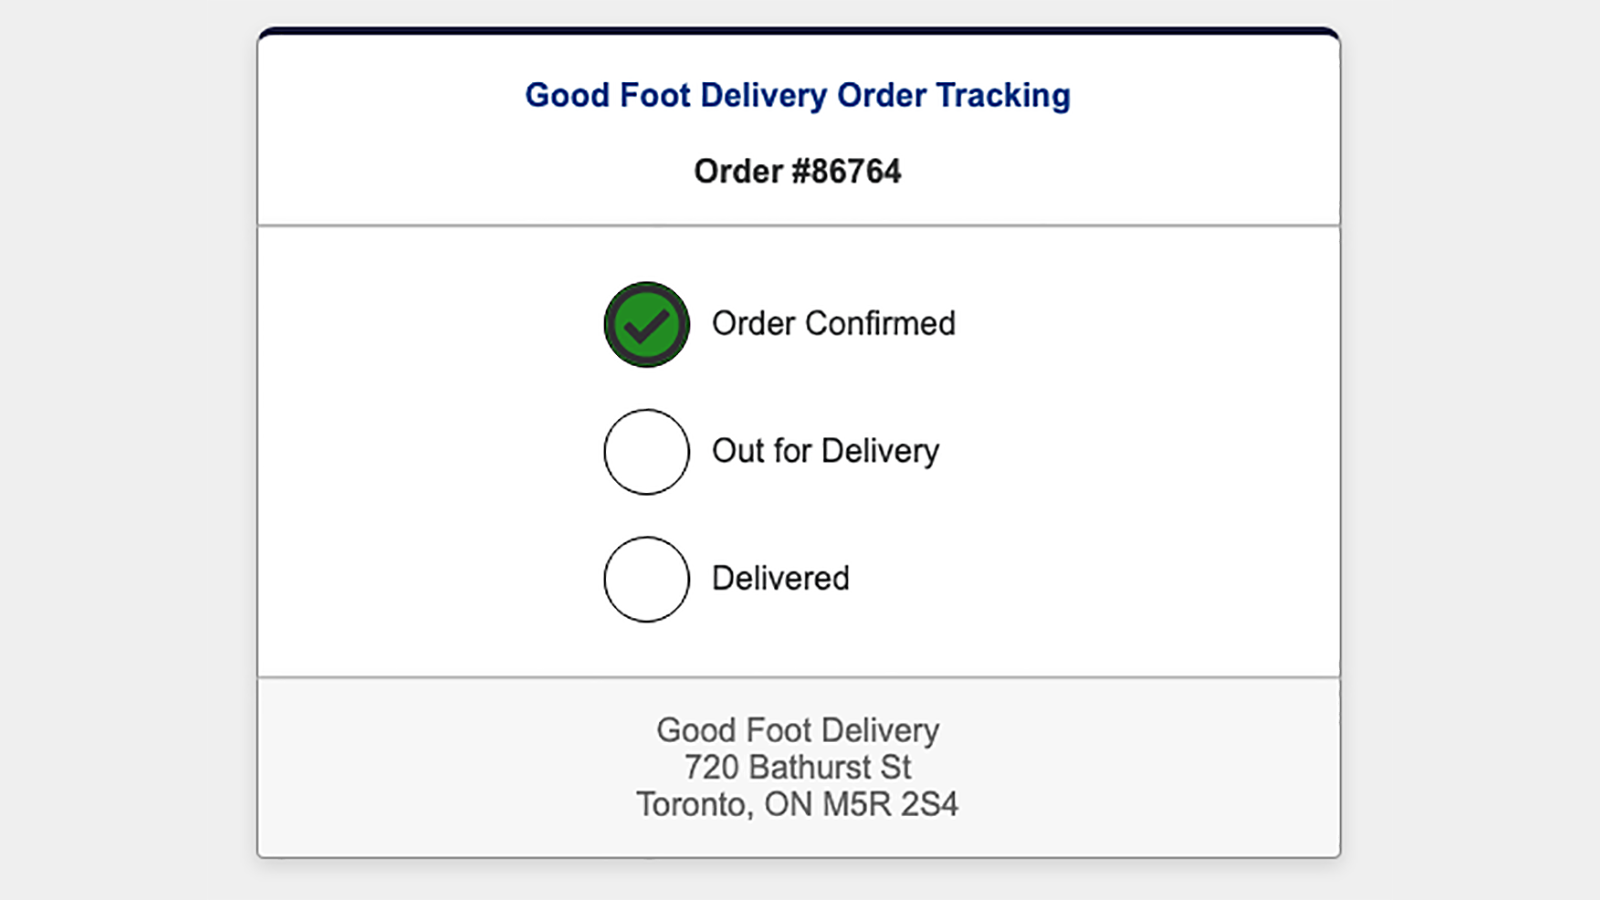 Good Foot Delivery tracking status